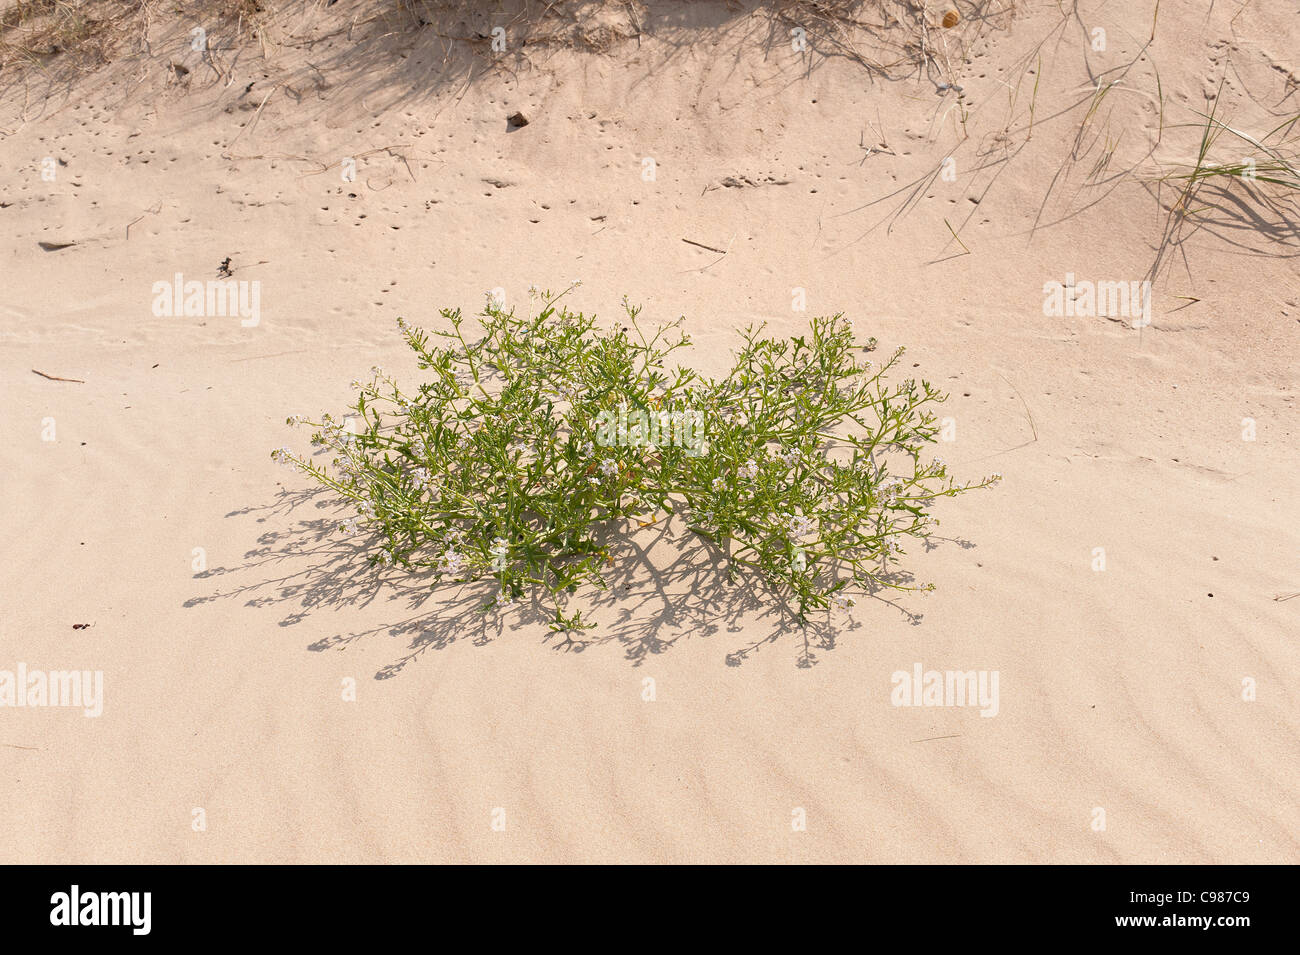 Succulent plant Cakile Maritima growing on sand dune starting to colonize the beach dune interface Stock Photo